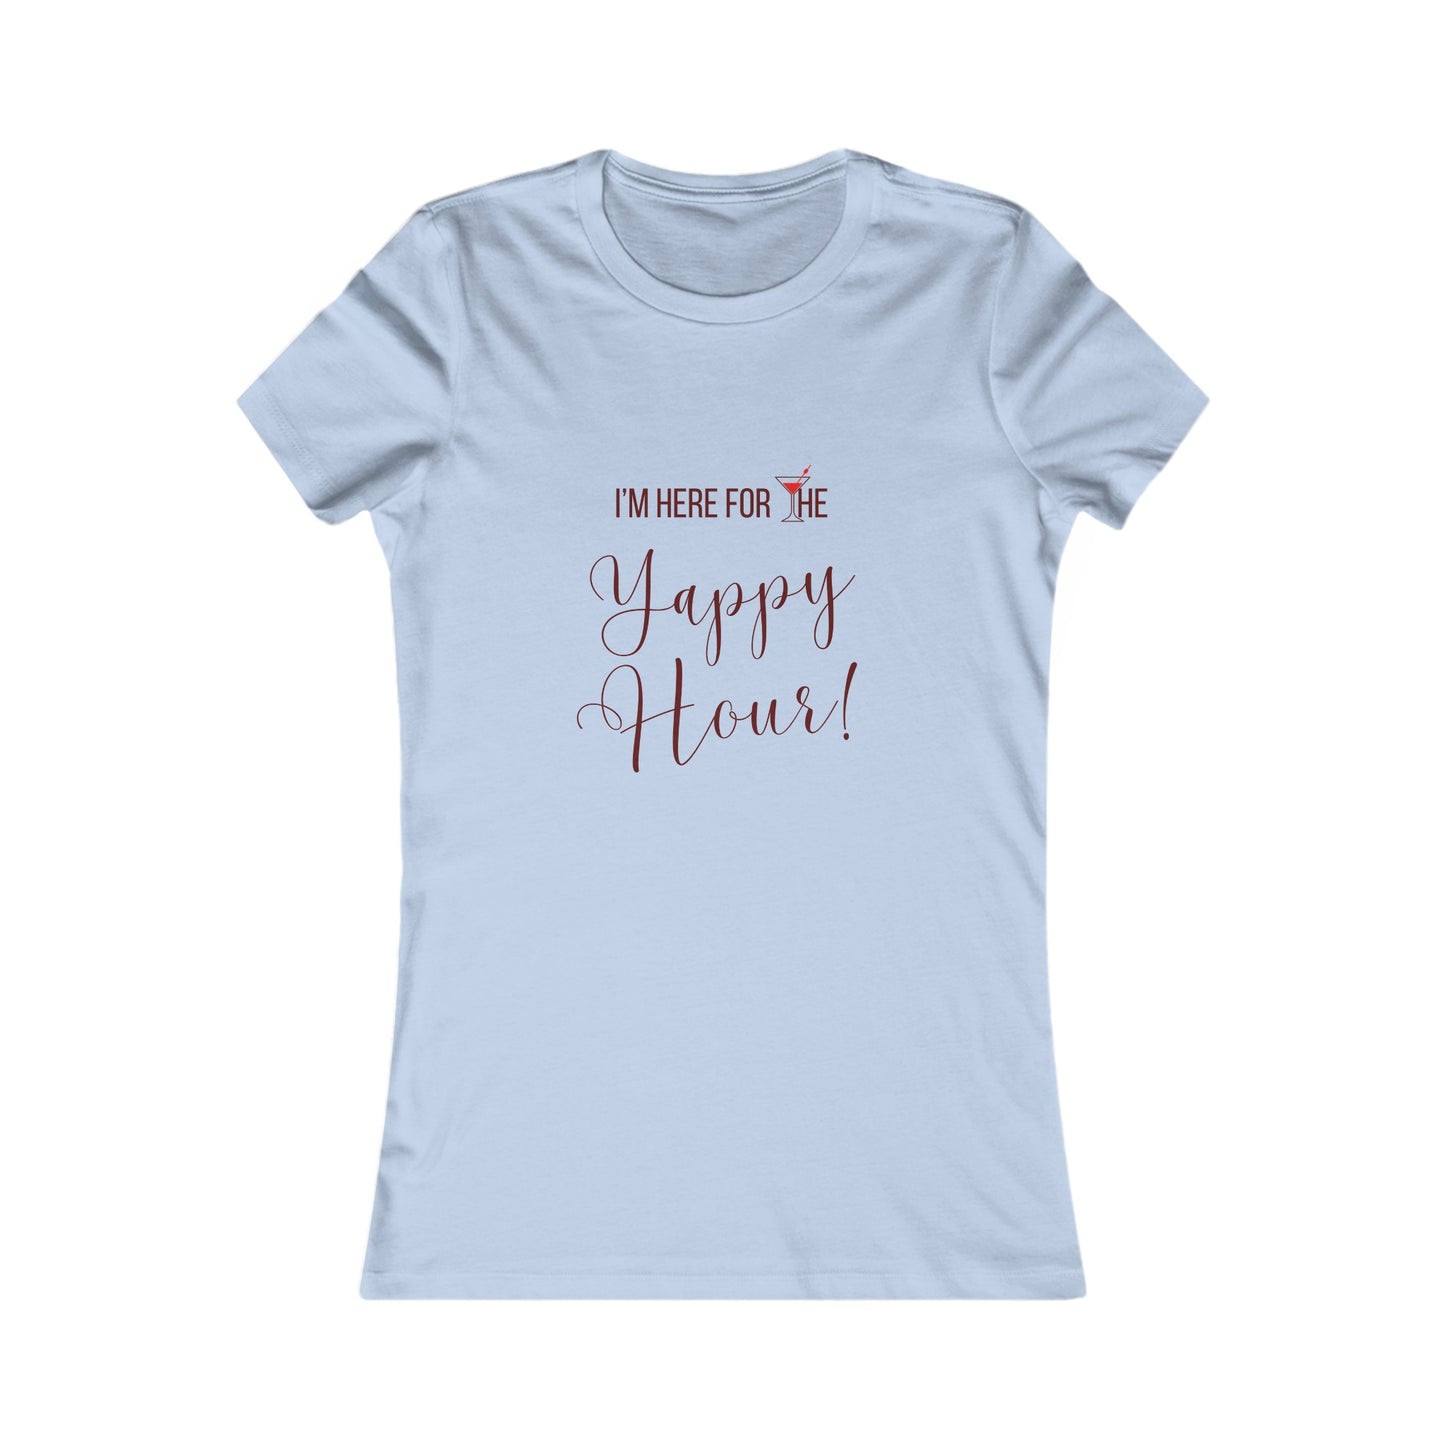 Yappy Hour Women's Fitted Tshirt (Burgundy & Red Logo)